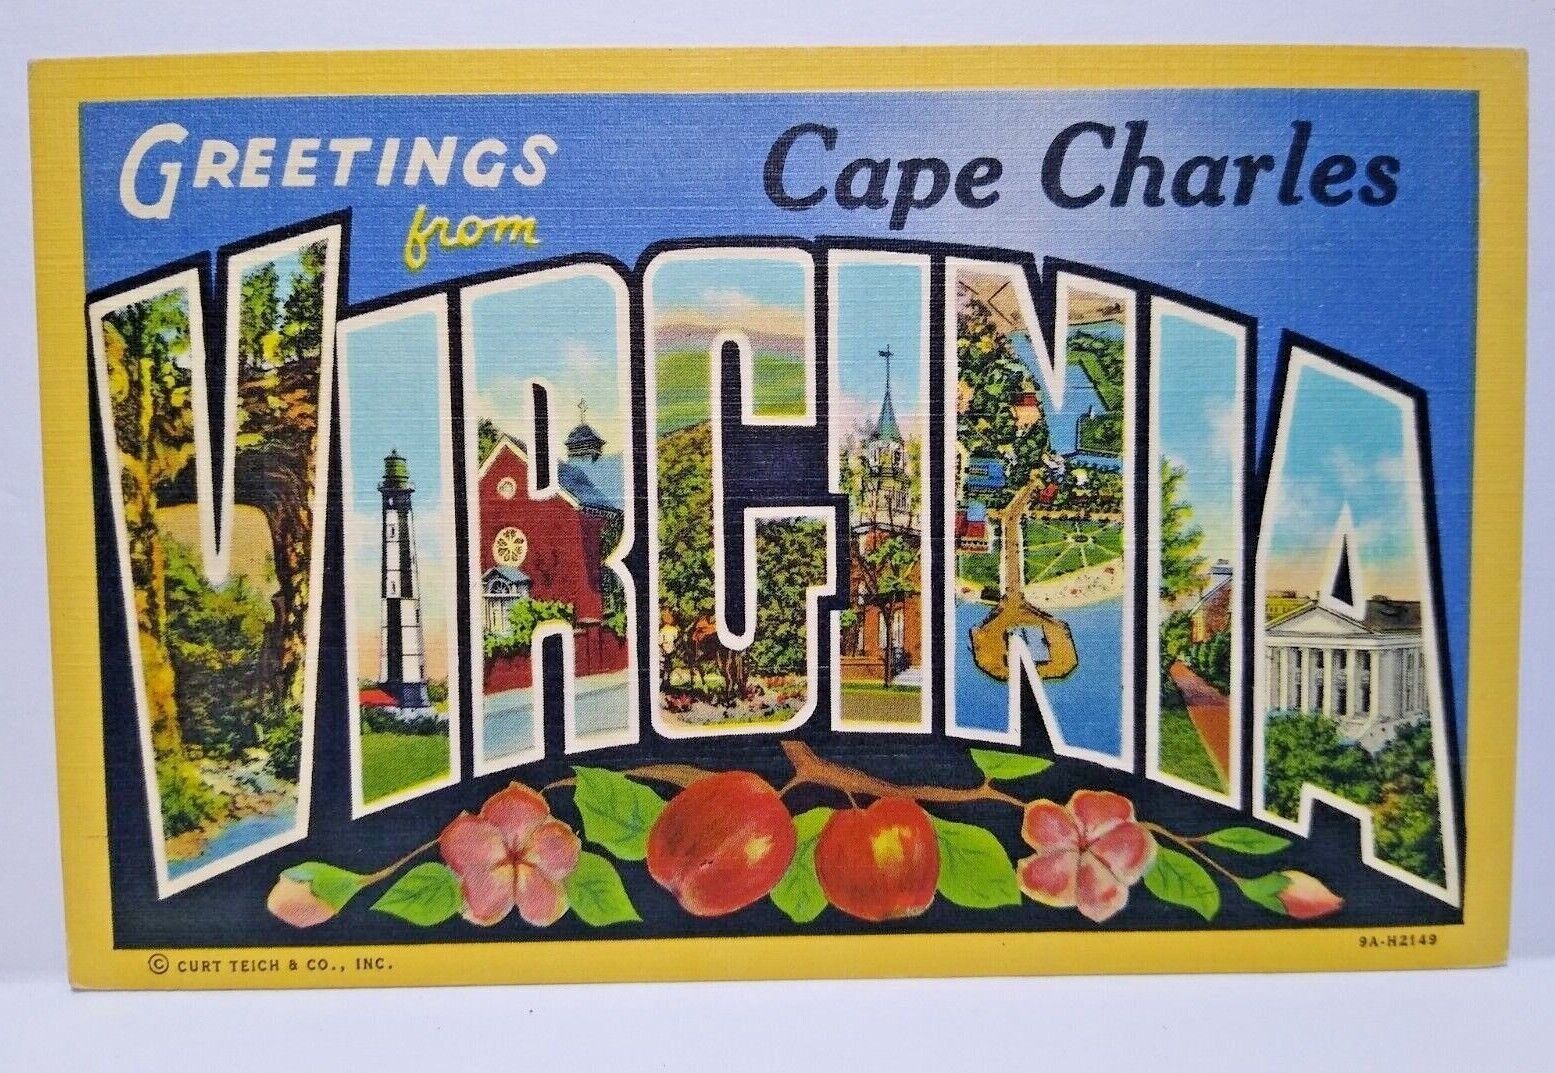 Greetings From Cape Charles Virginia Large Big Letter Linen Postcard Curt Teich - $14.25